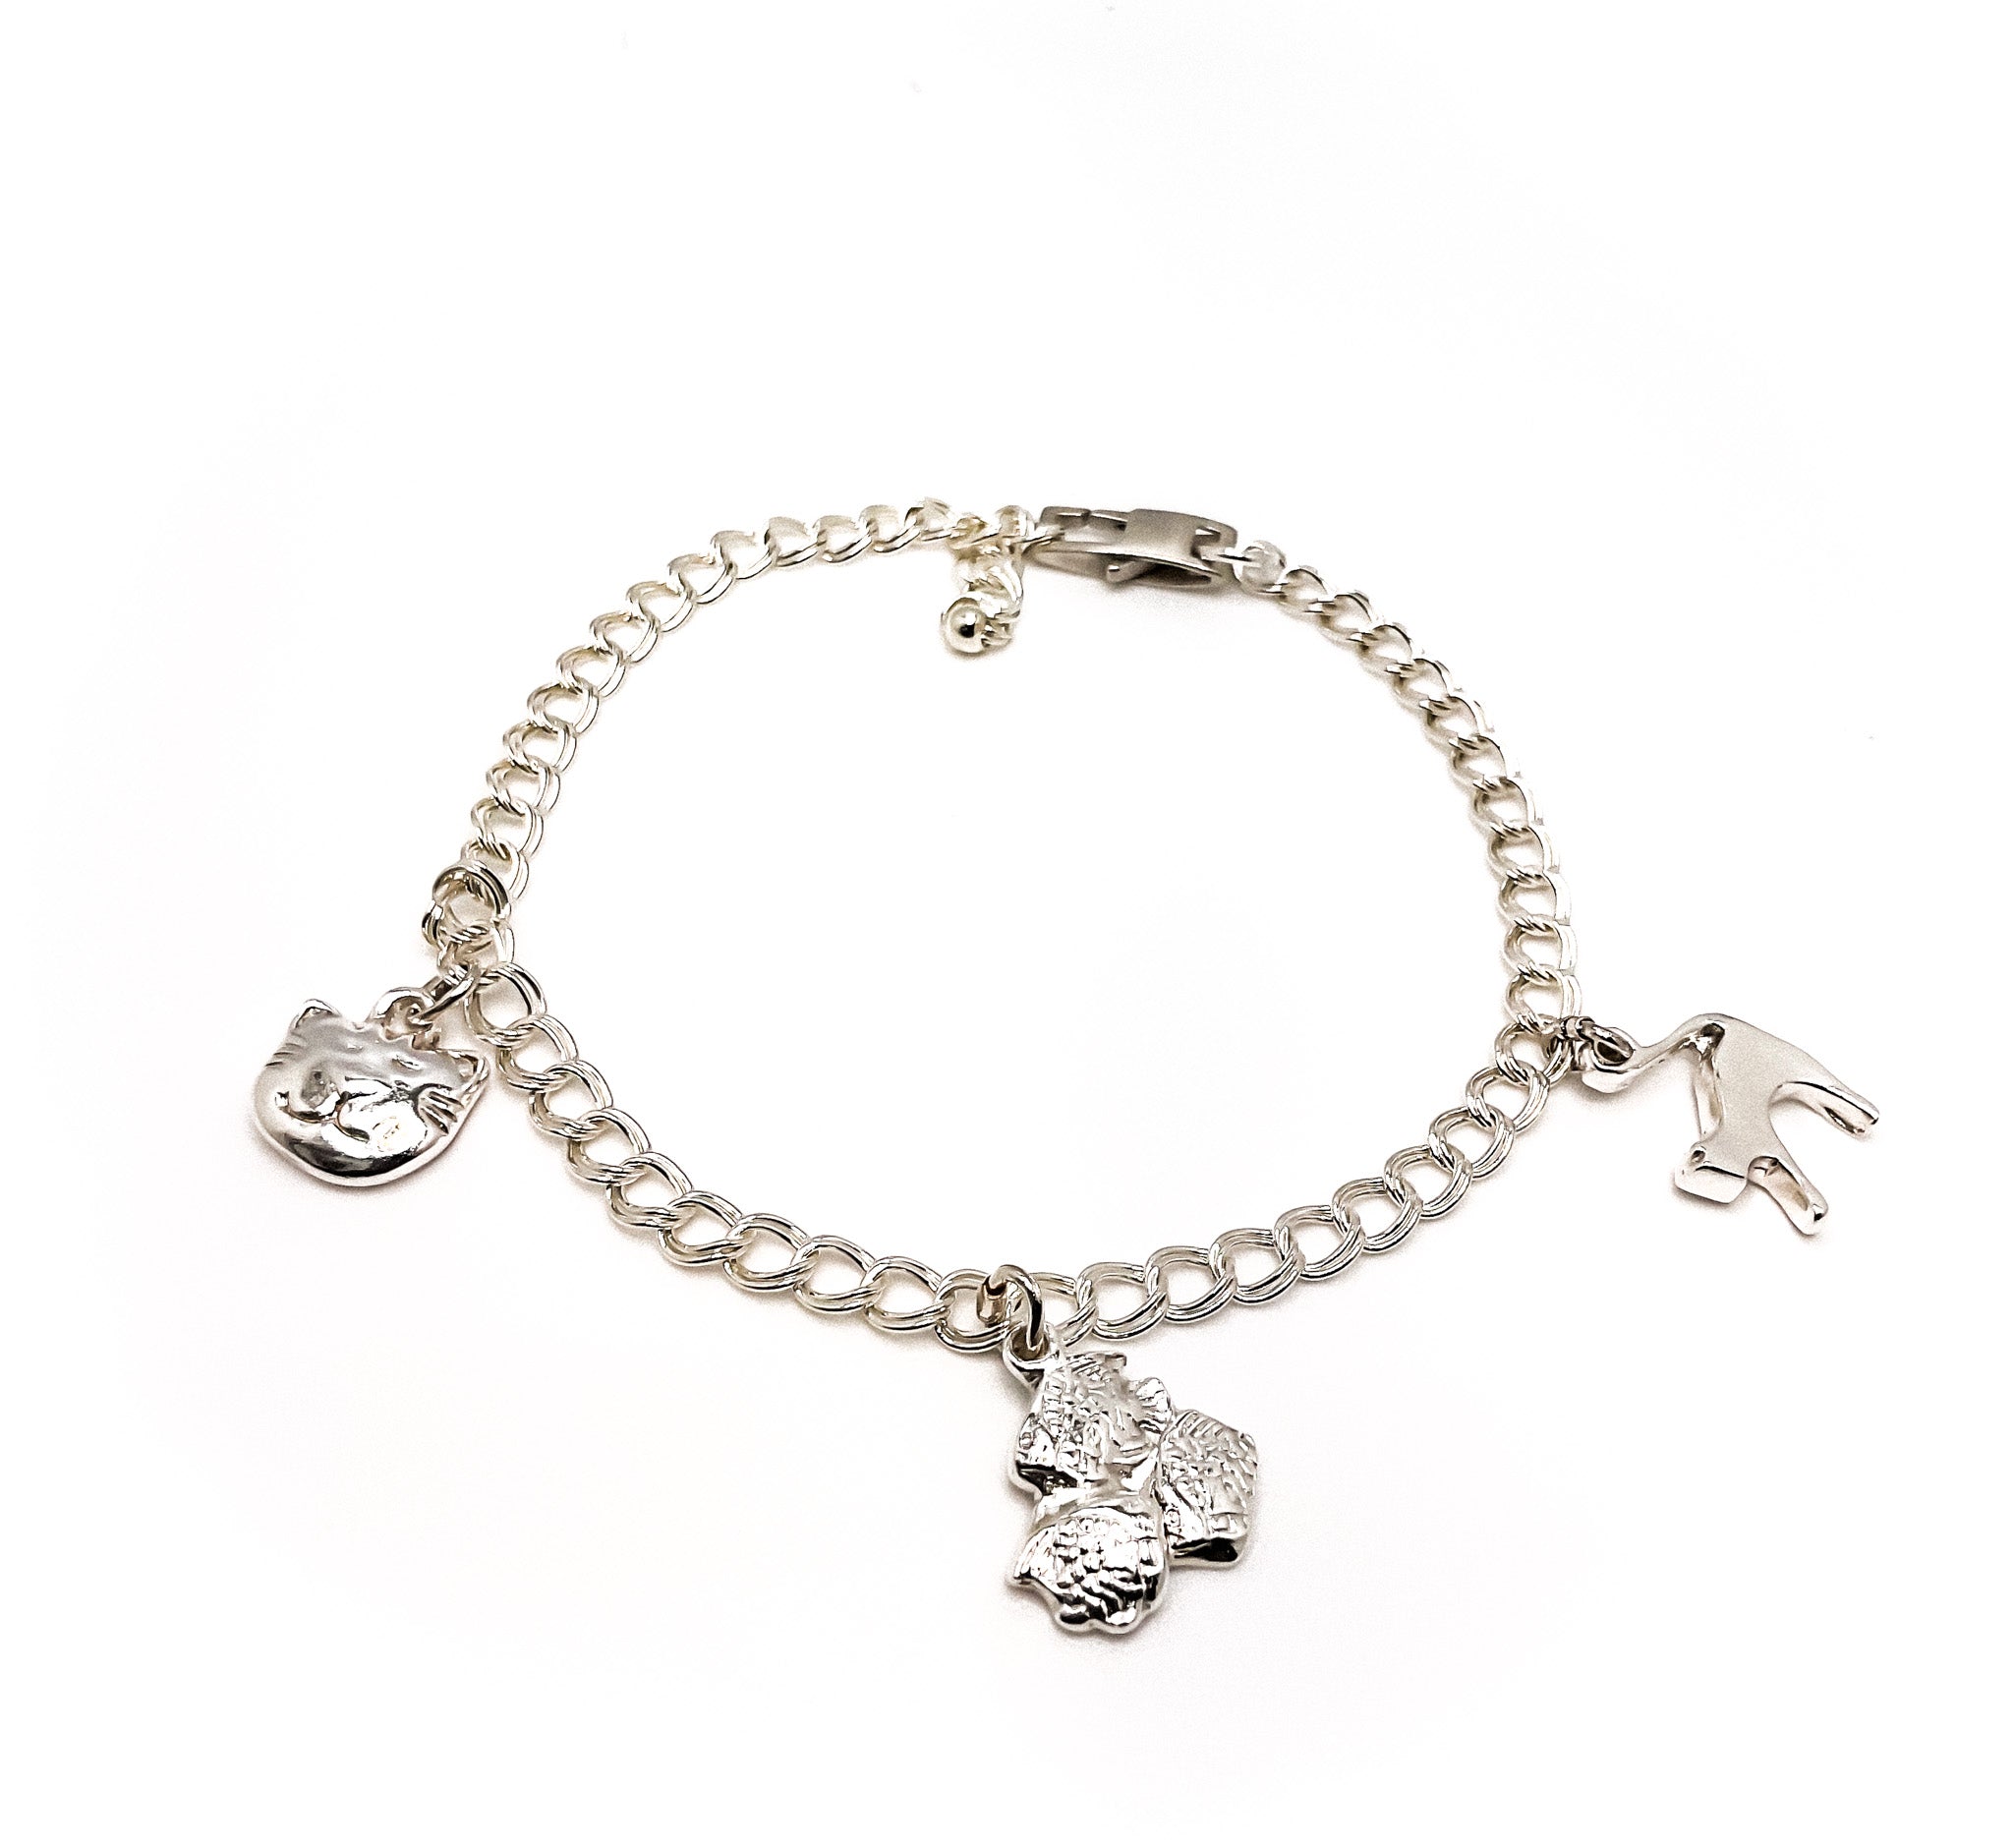 Gone Fishing Sterling Silver Charm Bracelet Cat Charms 61/2 inch